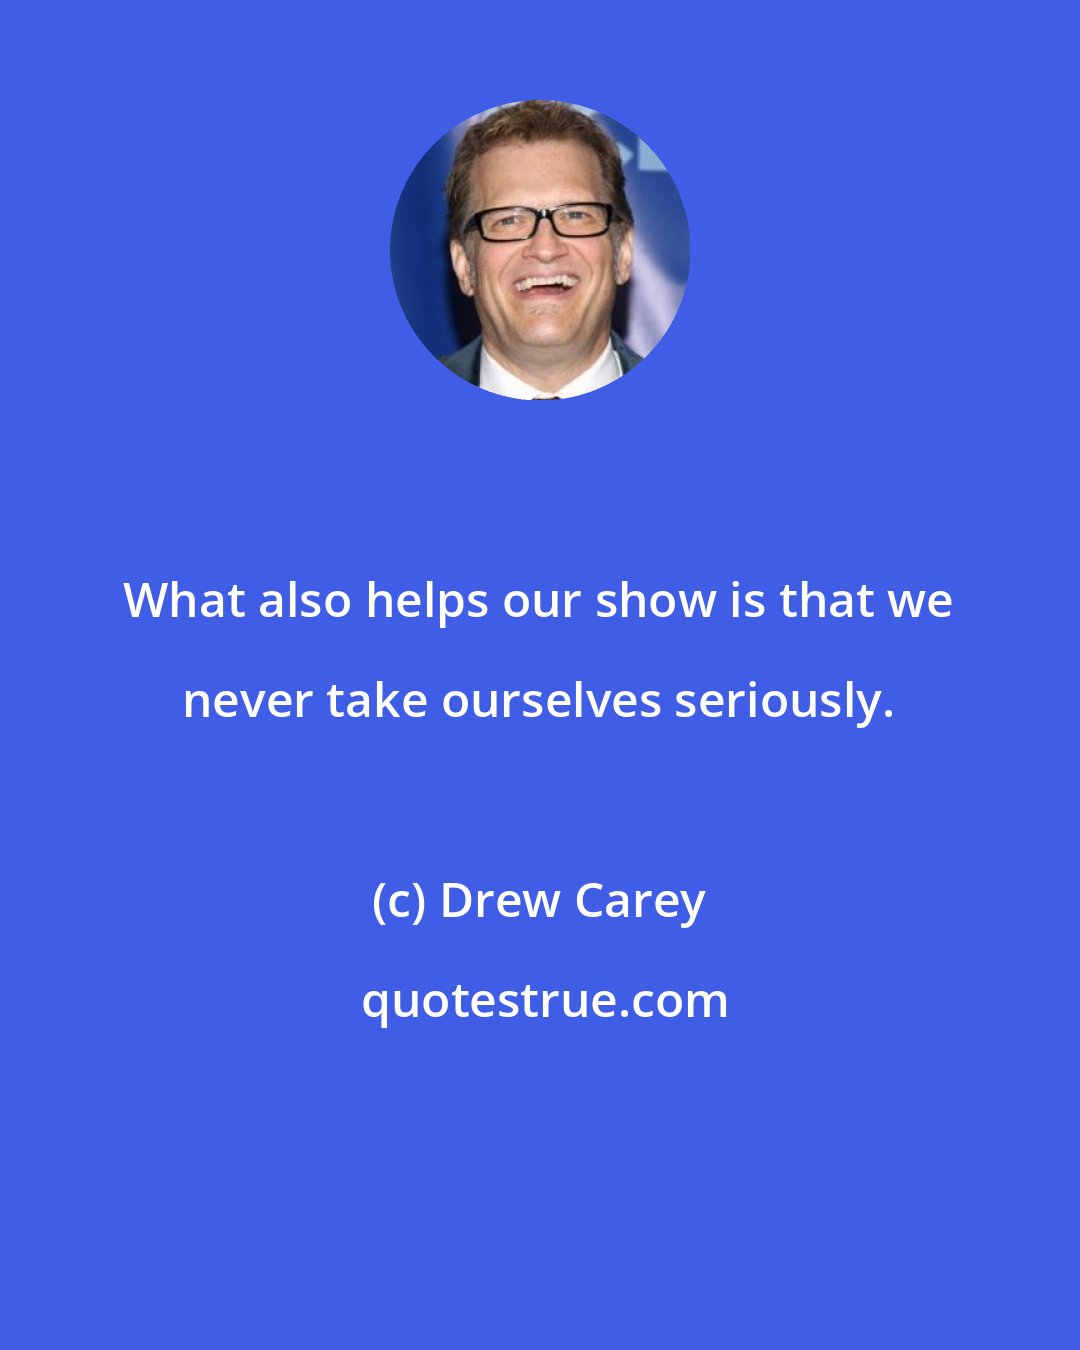 Drew Carey: What also helps our show is that we never take ourselves seriously.